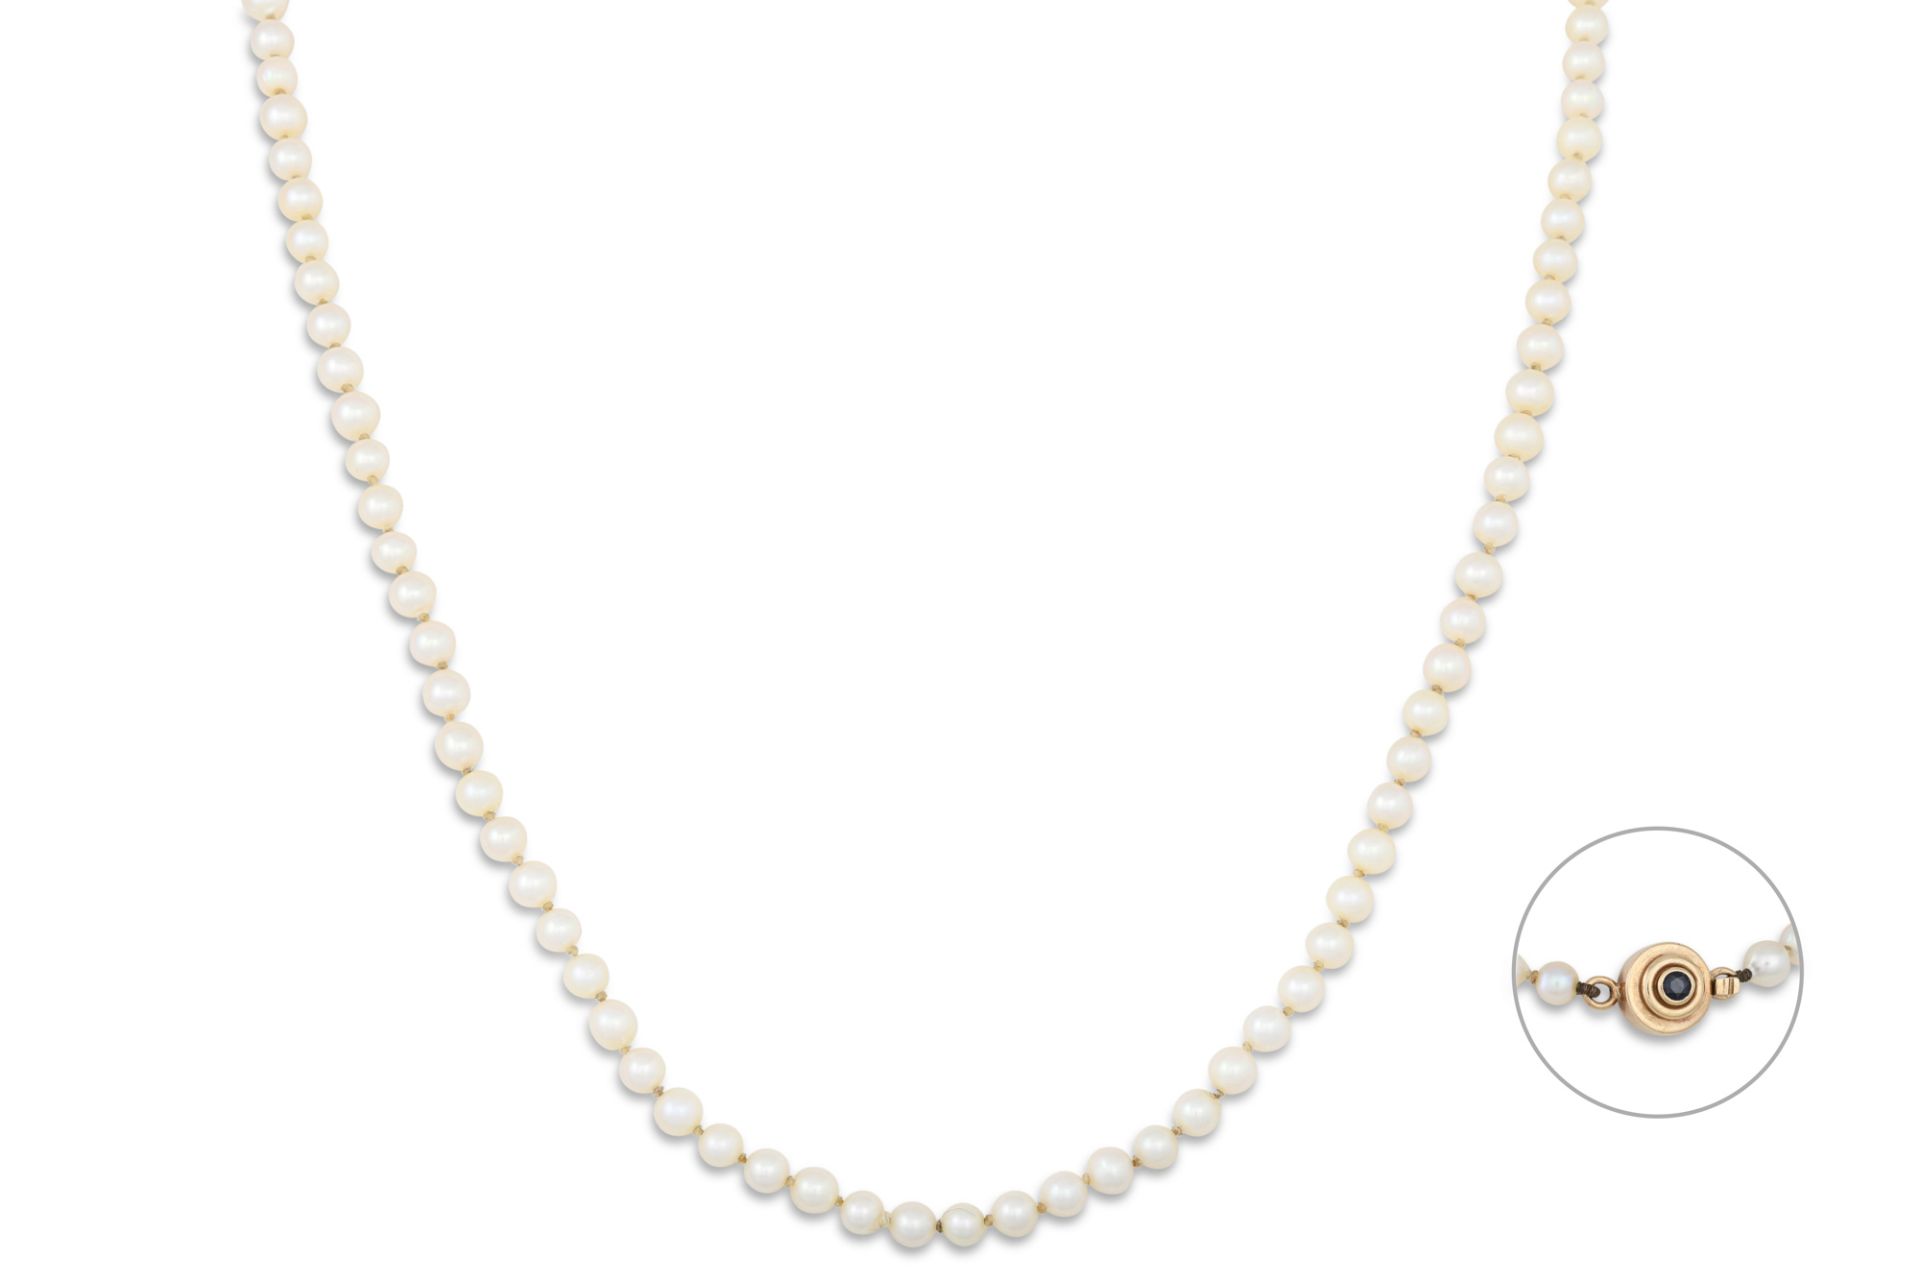 A CULTURED PEARL NECKLACE, with circular sapphire and yellow gold clasp, made by Emma Stewart